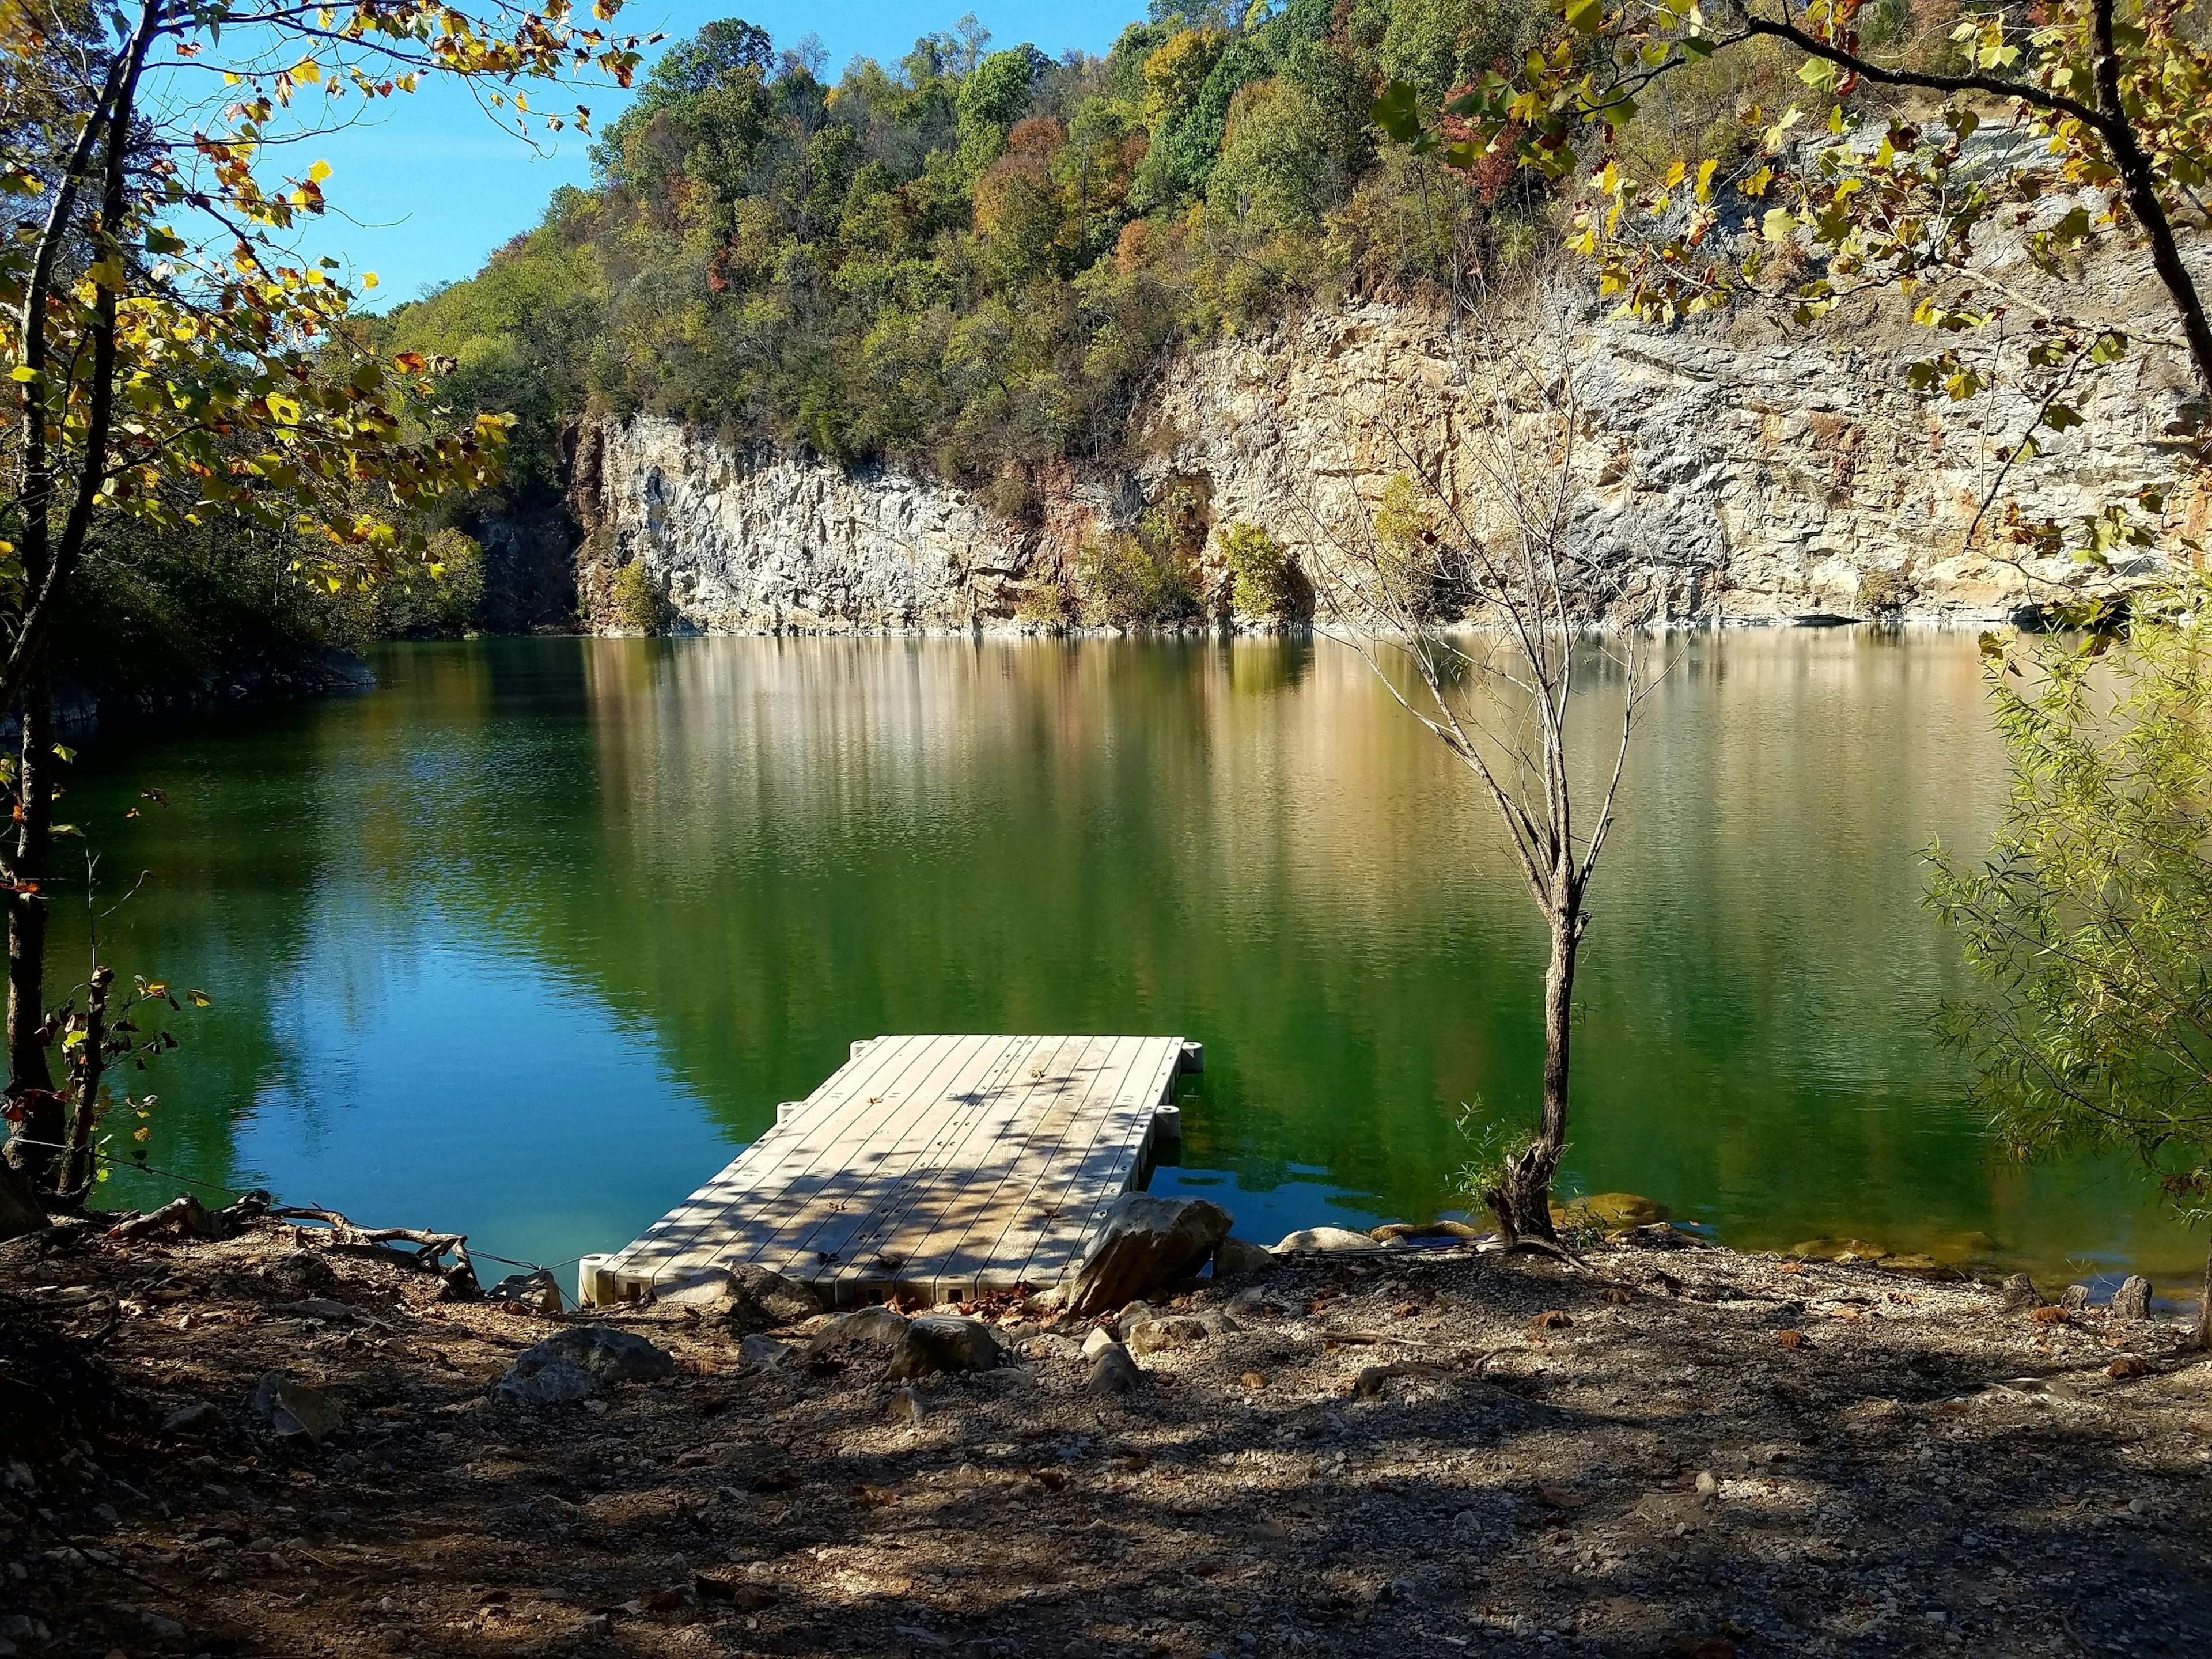 Meads Quarry Lake is backed by the cliffs that originally gave Knoxville its nickname, Marble City